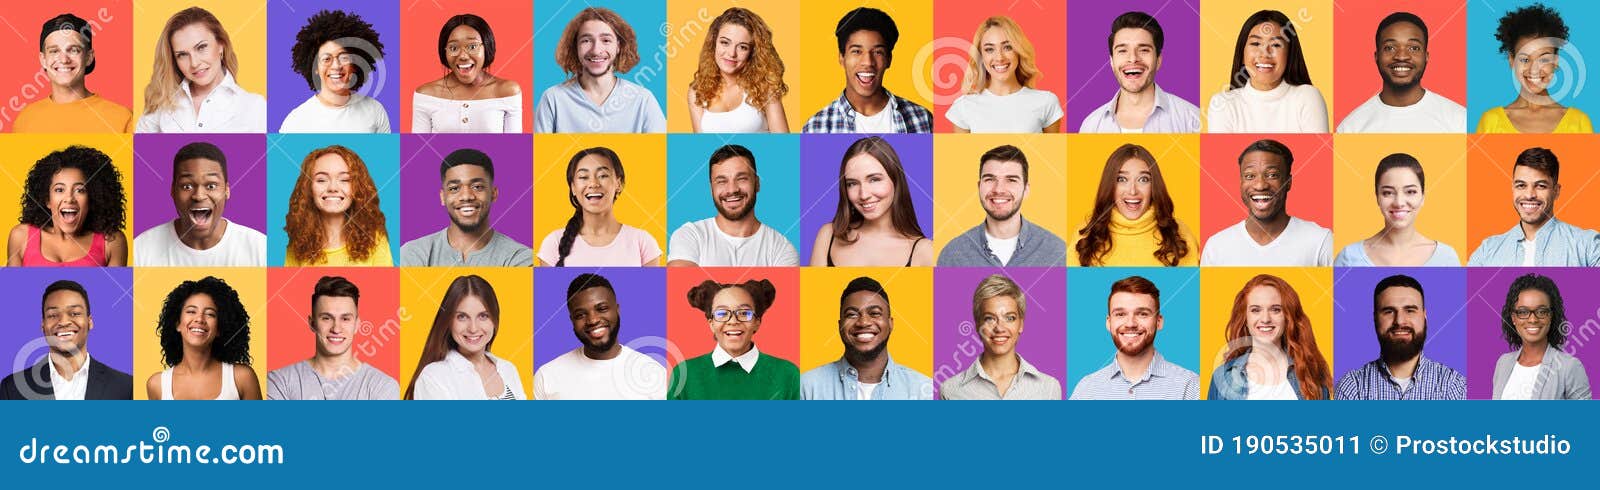 Diverse Millennial People`s Faces Smiling on Colorful Backgrounds ...